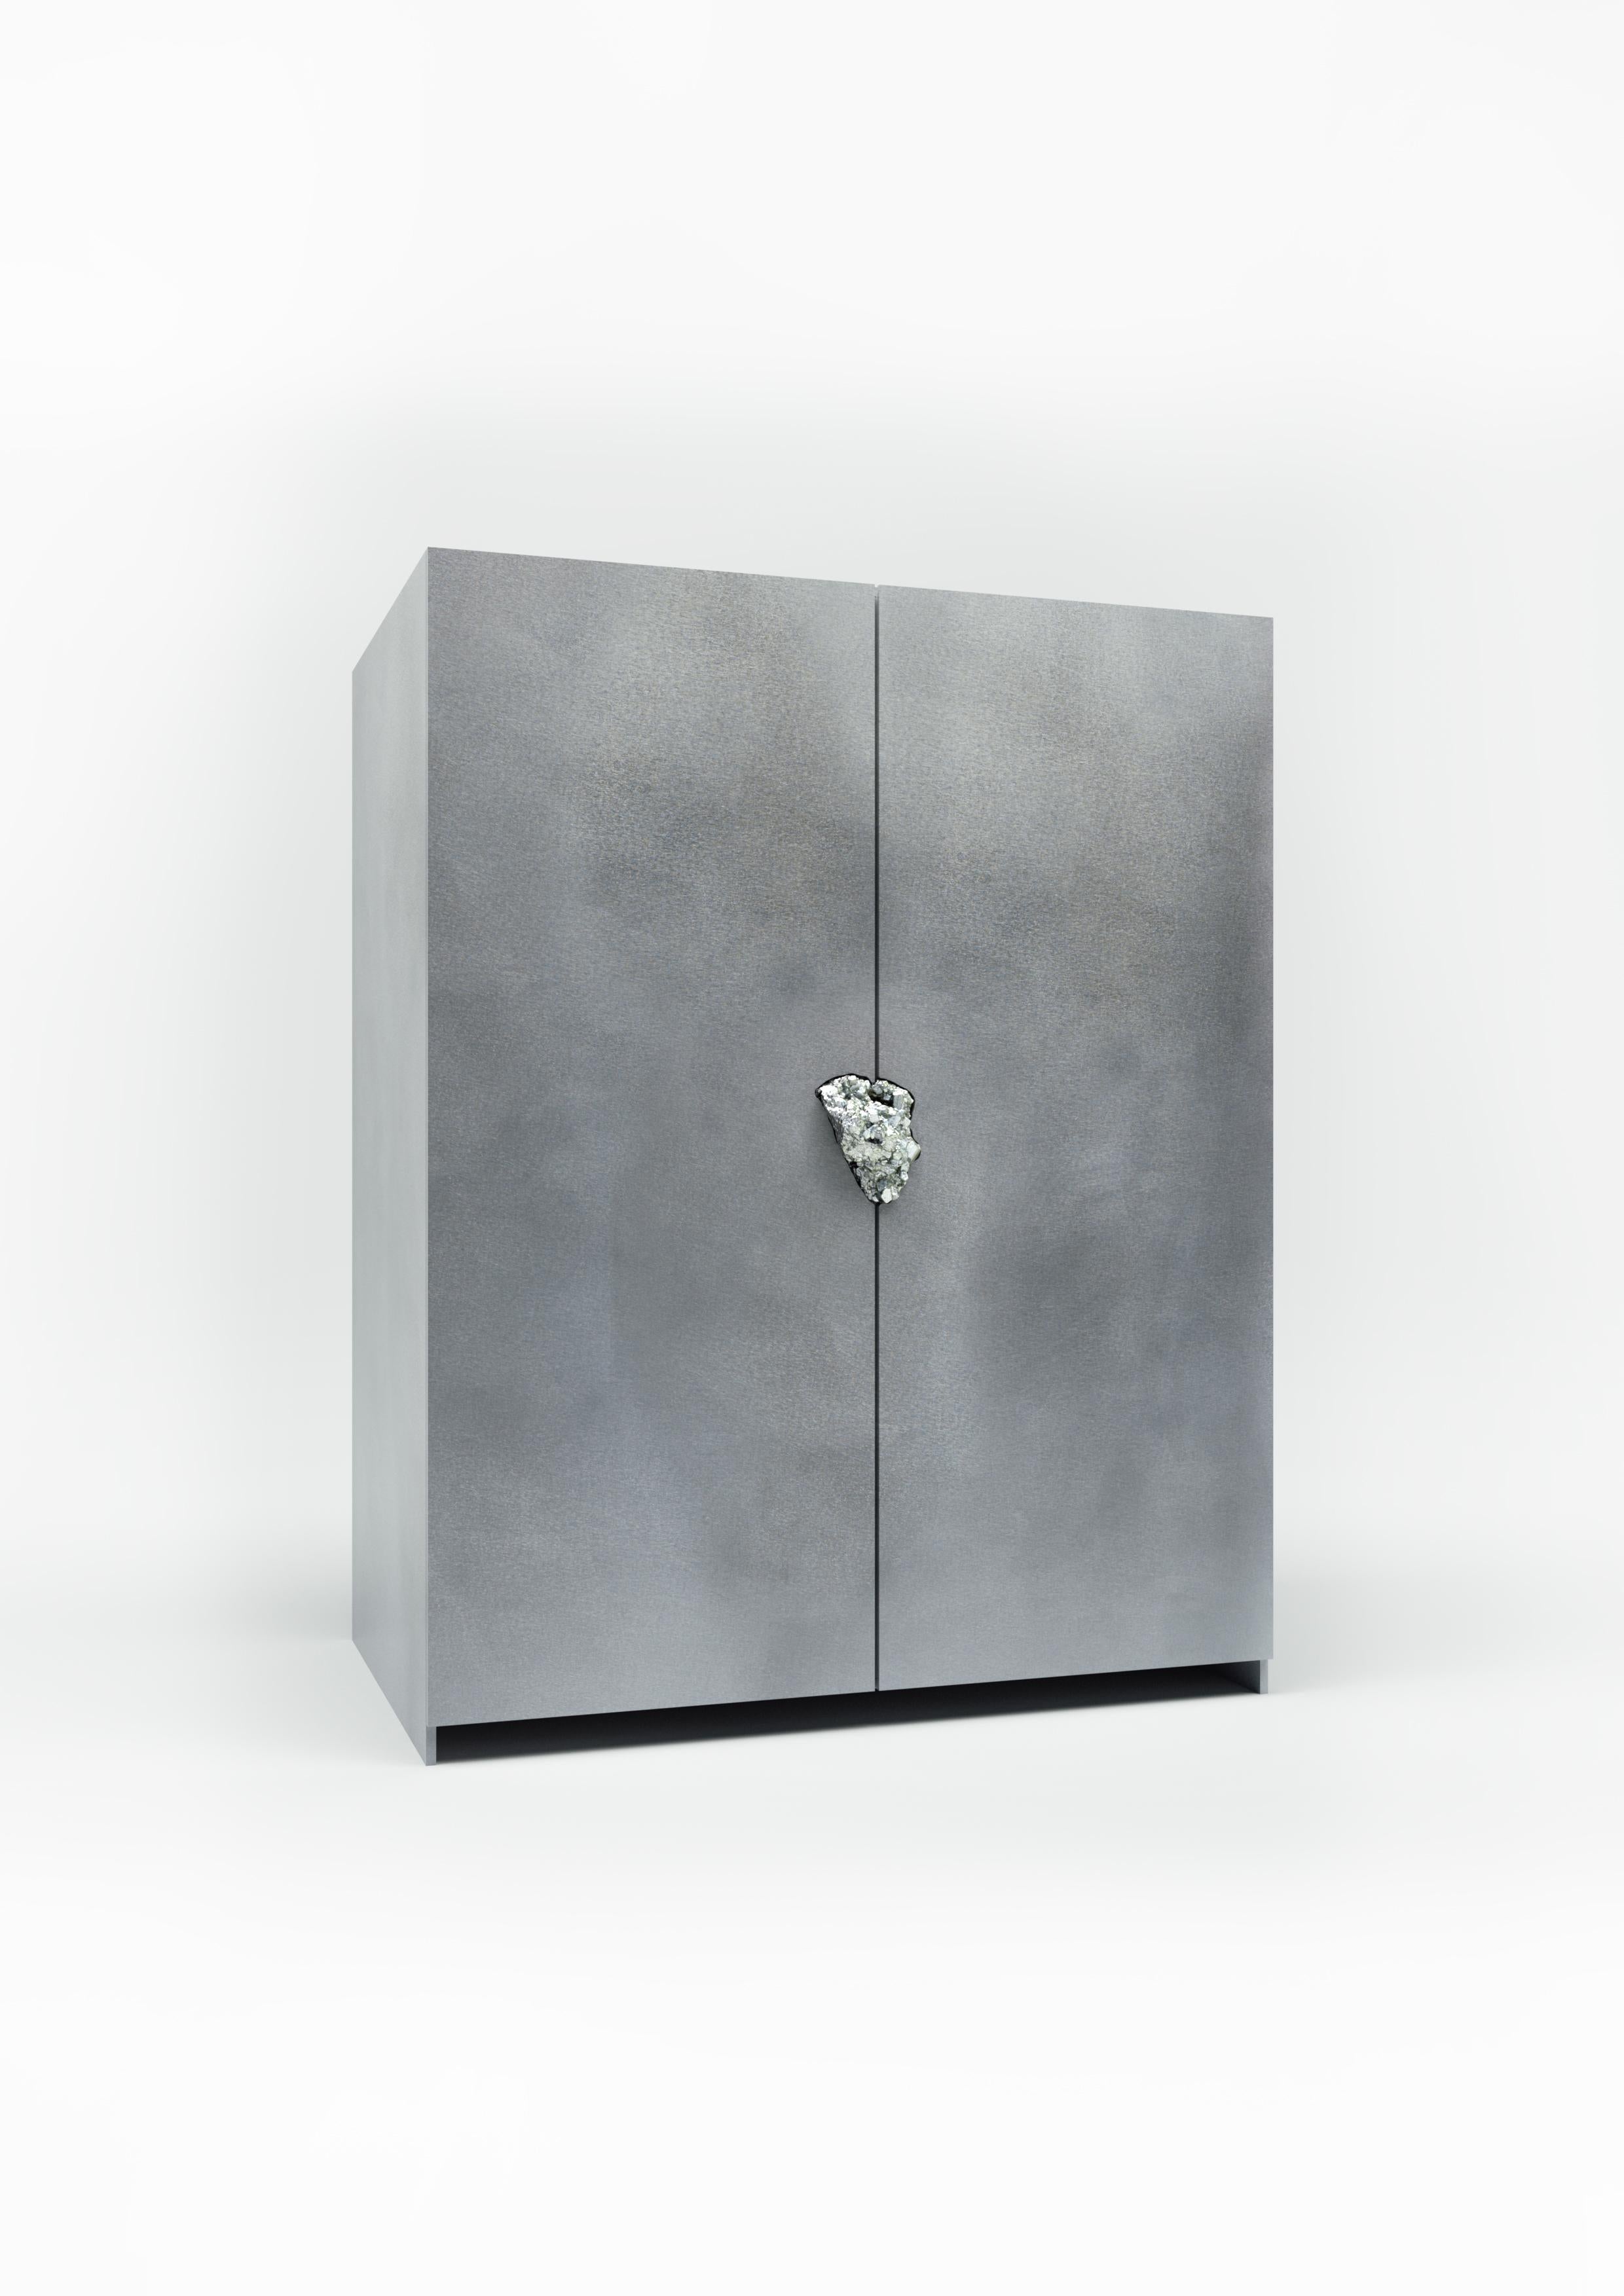 Hand-Crafted Oxidized and Waxed Aluminium Cabinet with Pyrite by Pierre De Valck For Sale